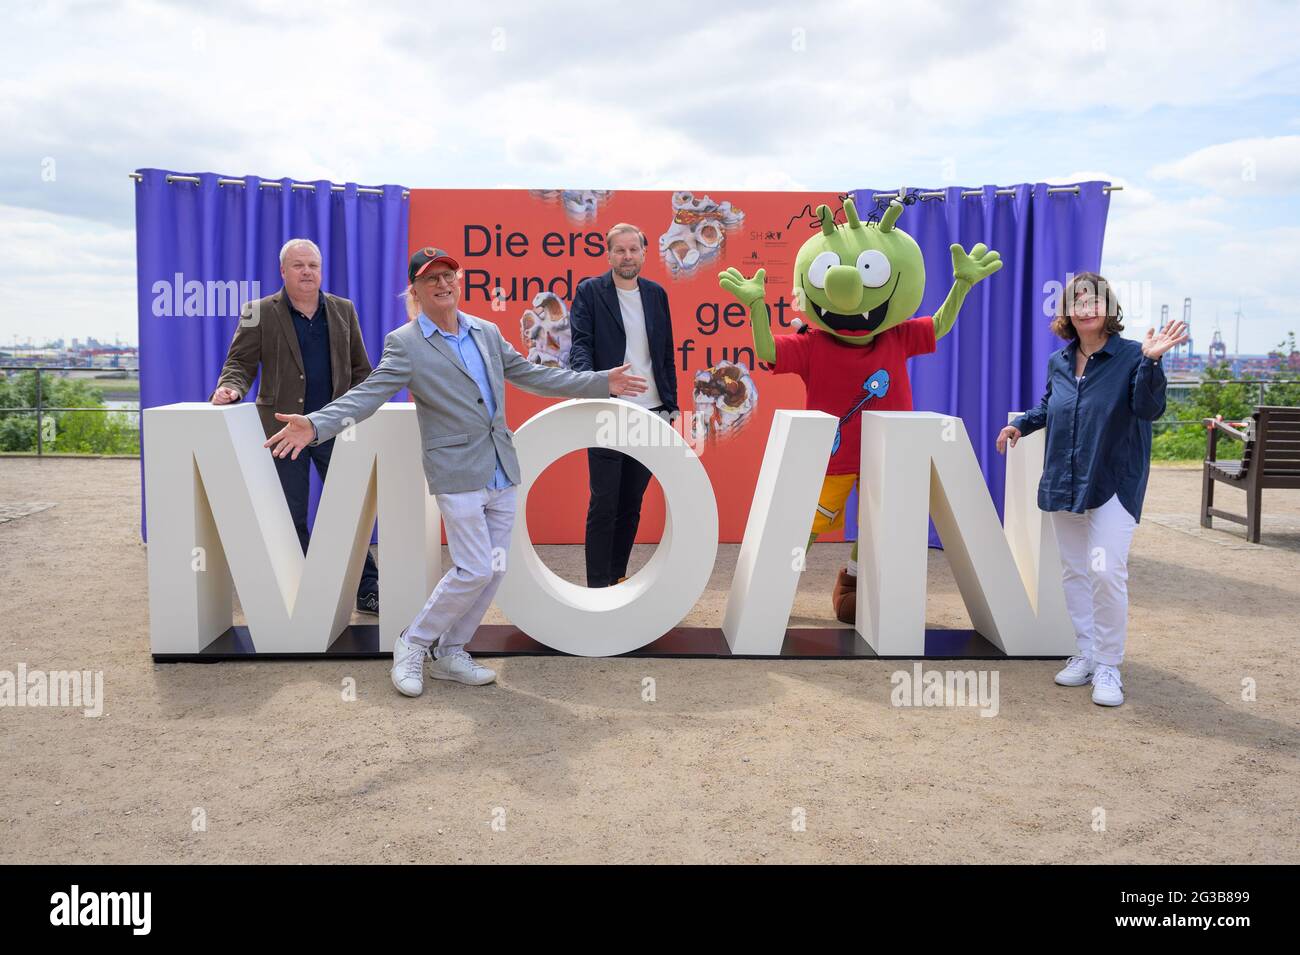 Hamburg, Germany. 15th June, 2021. Christian Springer (l-r), director and film producer, poses at a press event with Otto Waalkes, comedian, actor and director, Helge Albers, film producer and managing director of Moin Filmförderung Hamburg Schleswig-Holstein GmbH, a character from the animated film 'Die Olchis' and Sunna Isenberg, film producer, at the 'Moin' sign. On the occasion of the nationwide cinema release on 01 July 2021, MOIN Filmförderung Hamburg Schleswig-Holstein is luring viewers back into the halls with free cinema tickets. Credit: Jonas Walzberg/dpa/Alamy Live News Stock Photo